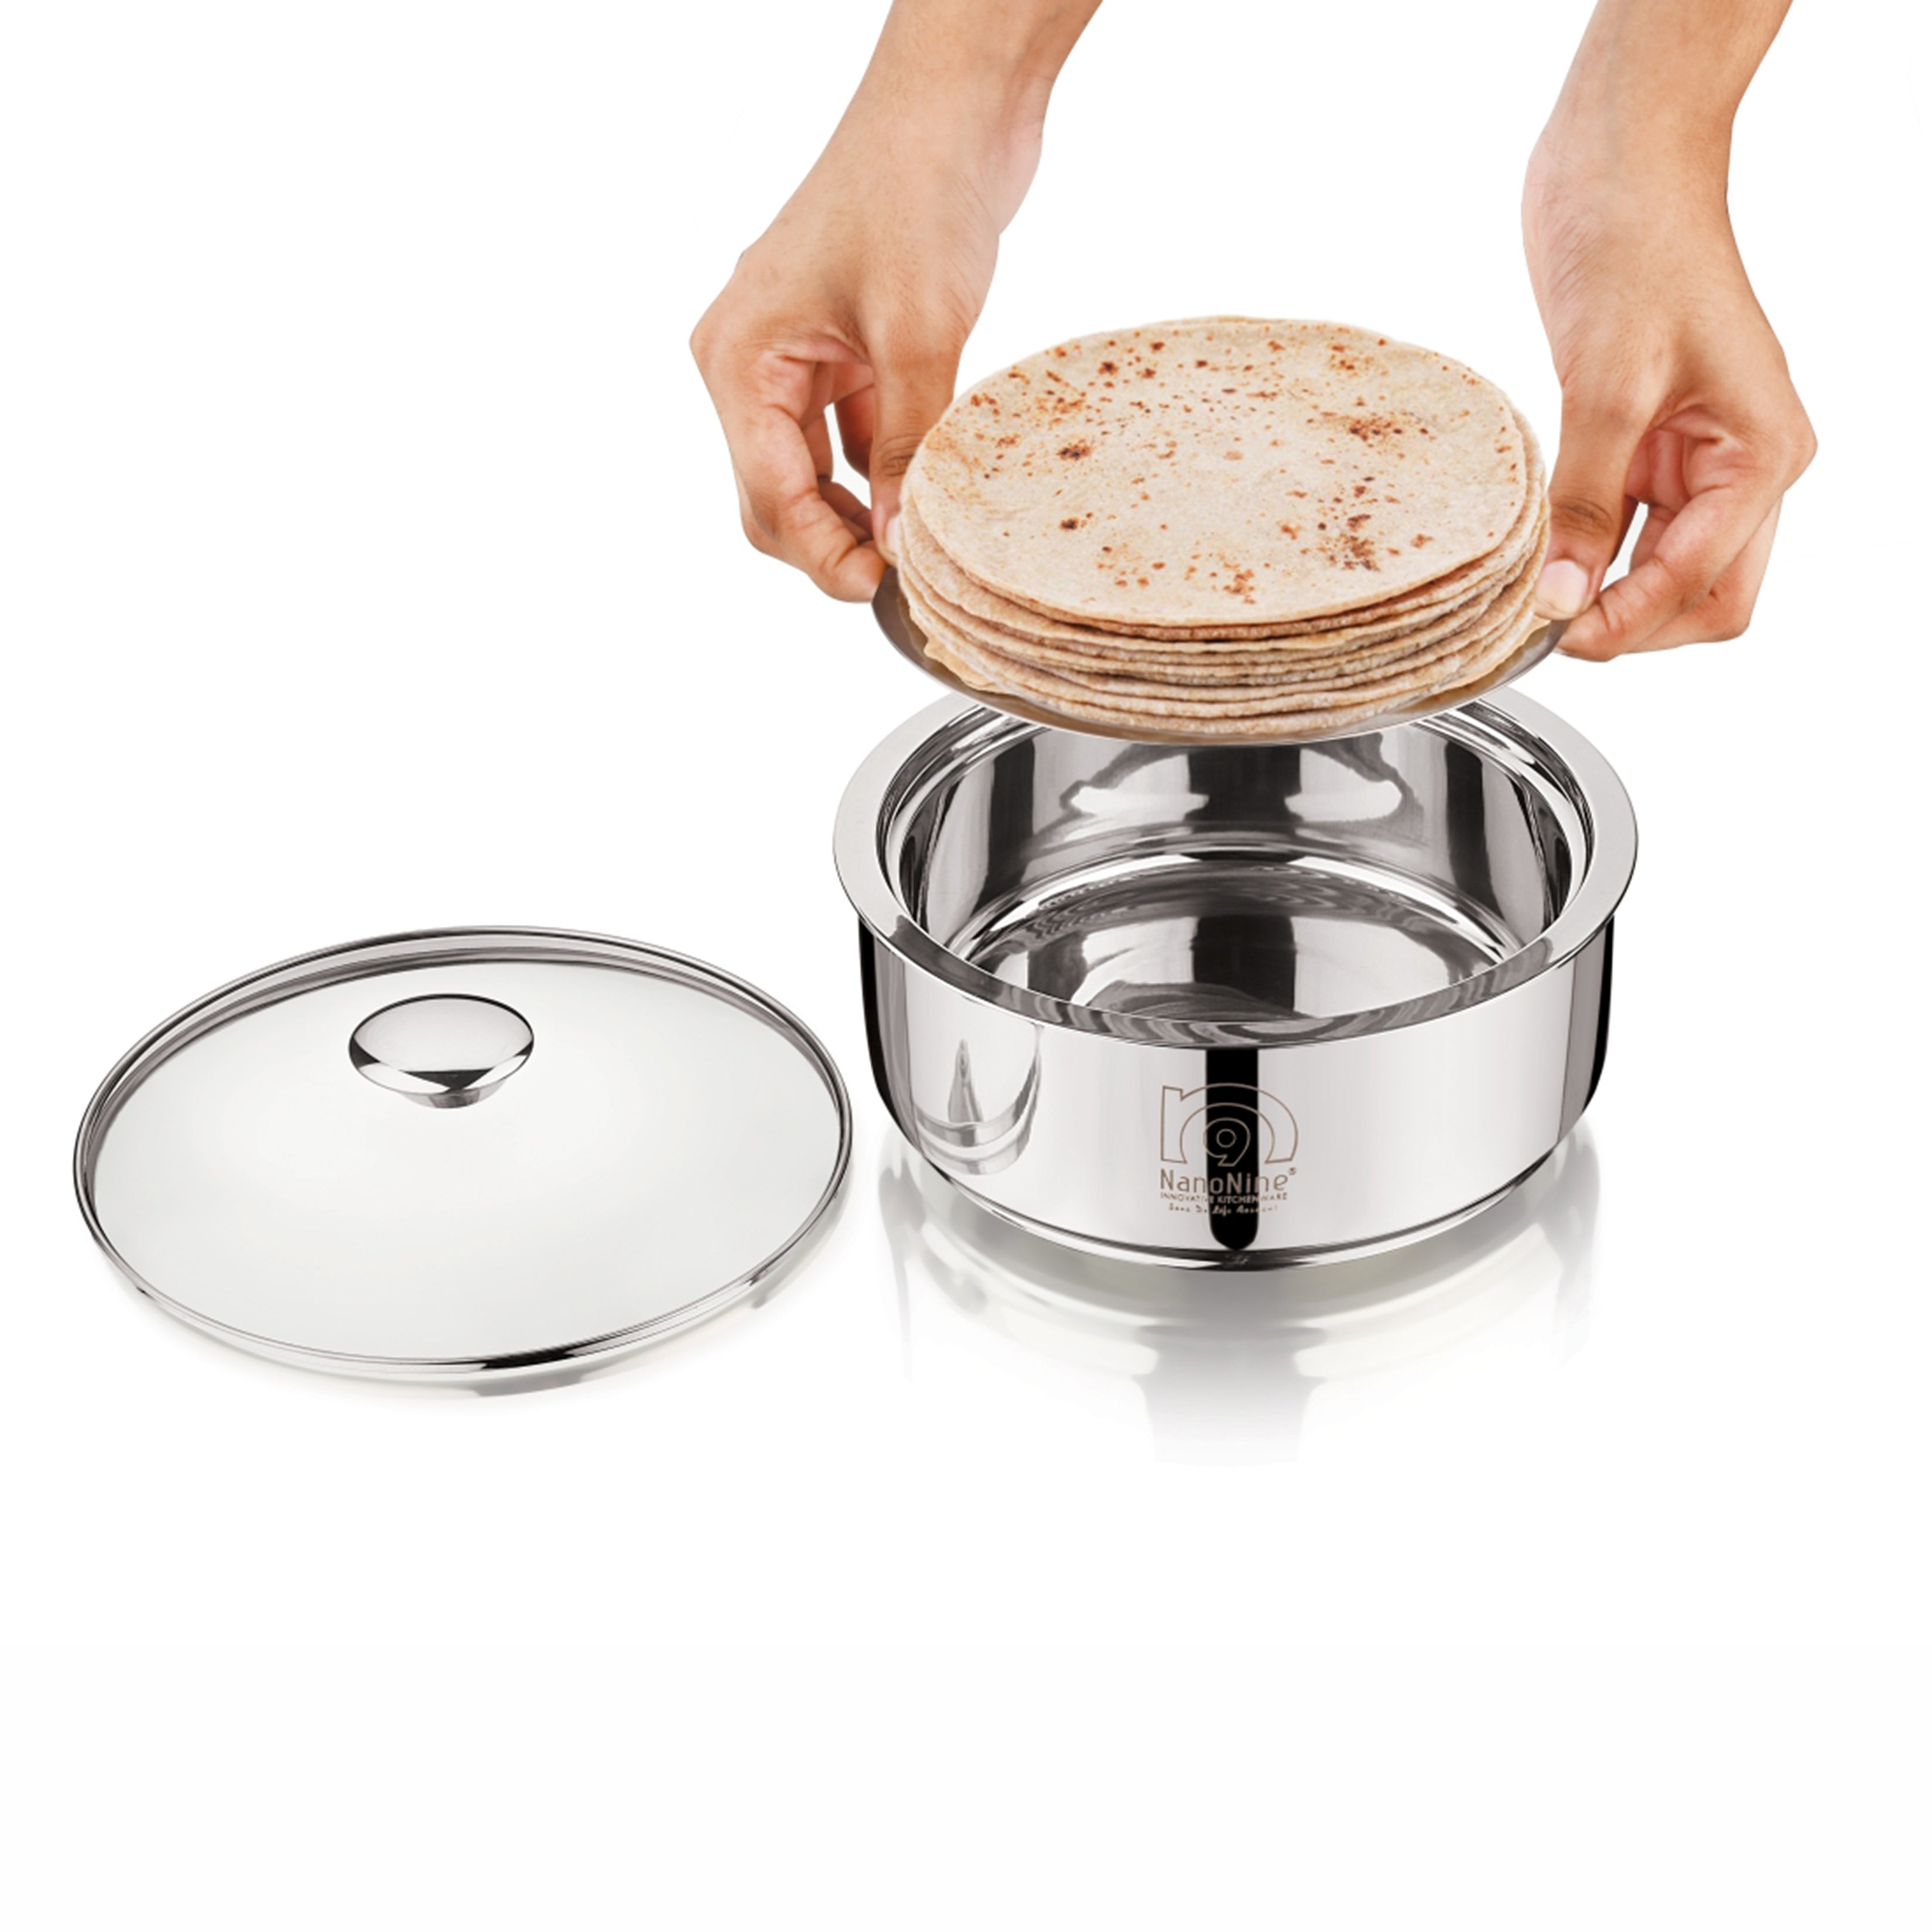 NanoNine Chapati Server 1.25 L Double Wall Insulated Stainless Steel Serve Fresh Roti Pot with Steel Coaster and Glass Lid.